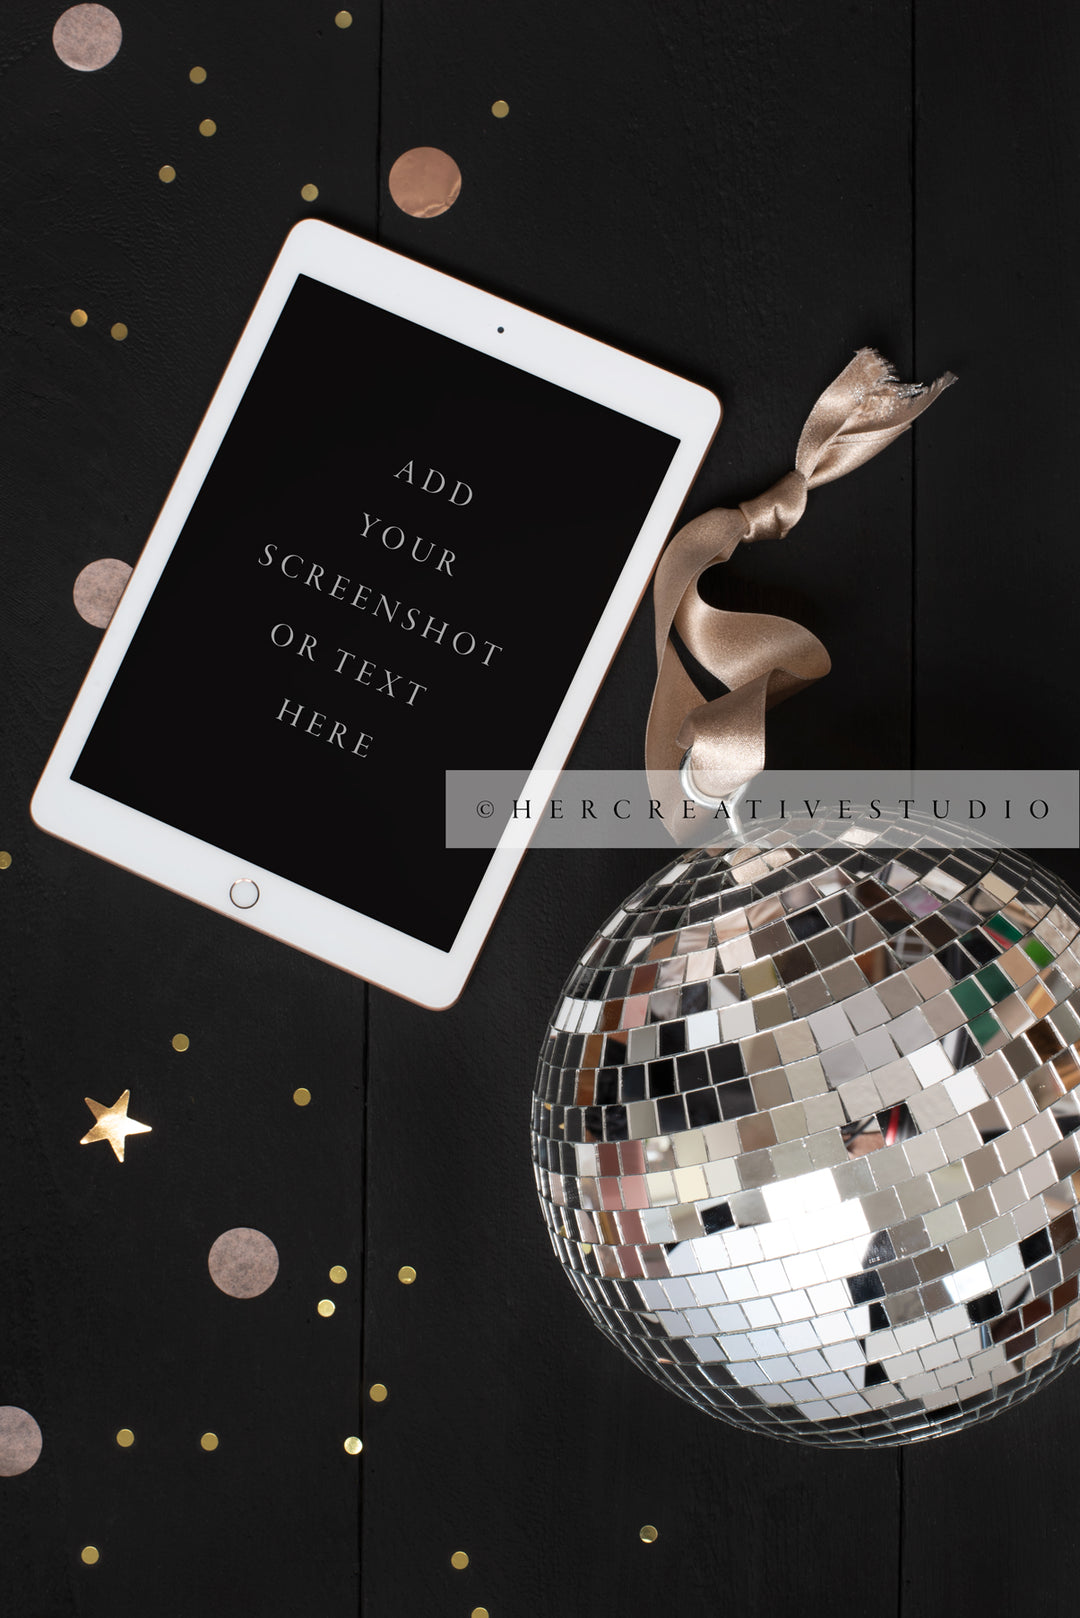 Disco Ball & Tablet, New Year's Eve Stock Image